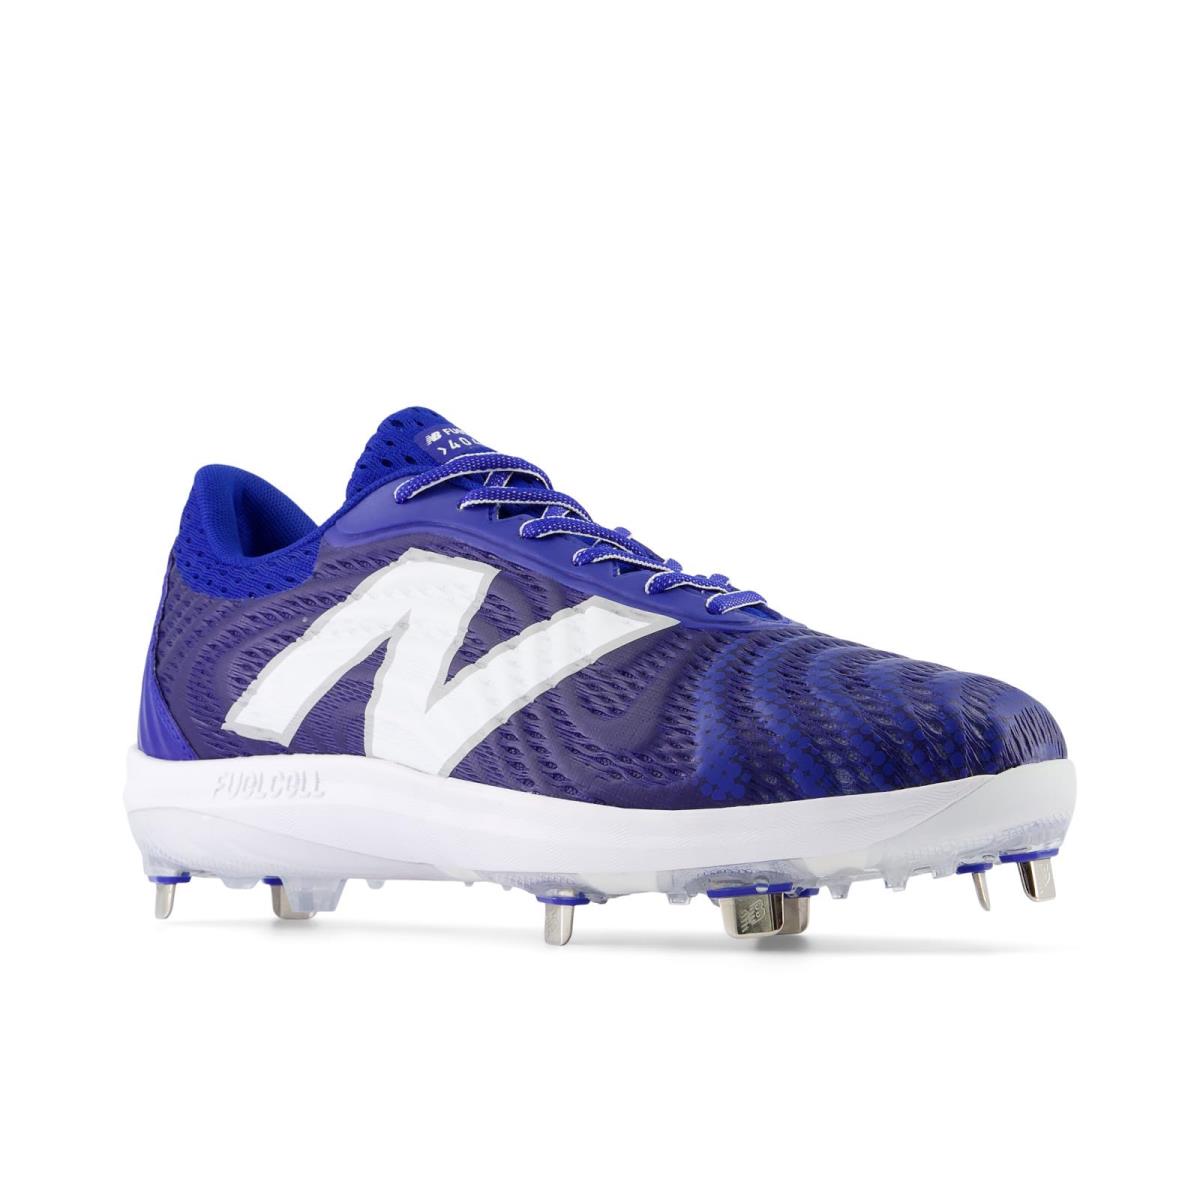 Man`s Sneakers Athletic Shoes New Balance Fuelcell 4040 v7 Metal Team Royal/Optic White